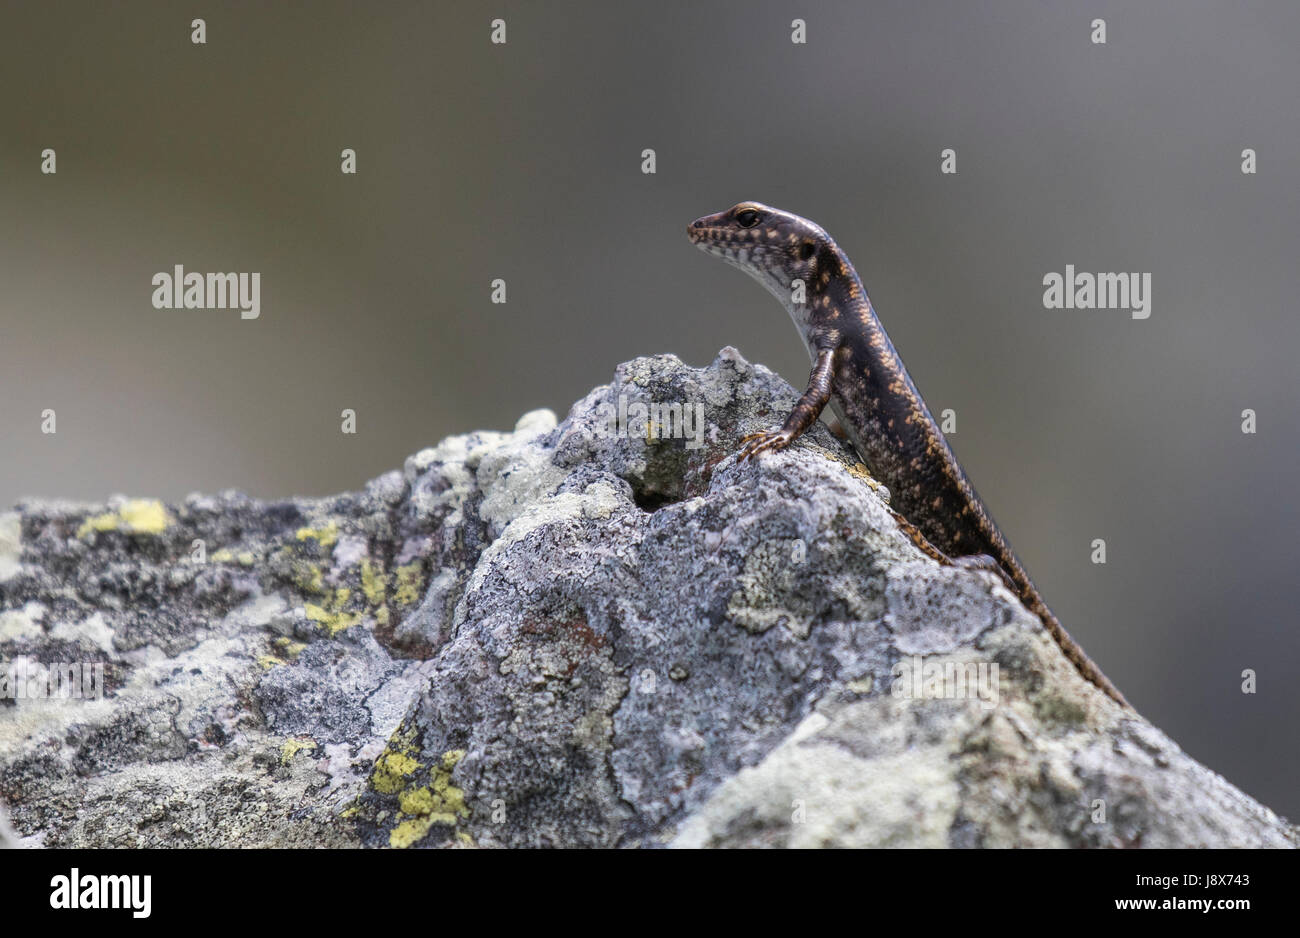 A Stout Bar-sided Skink gazing into the distance. Stock Photo